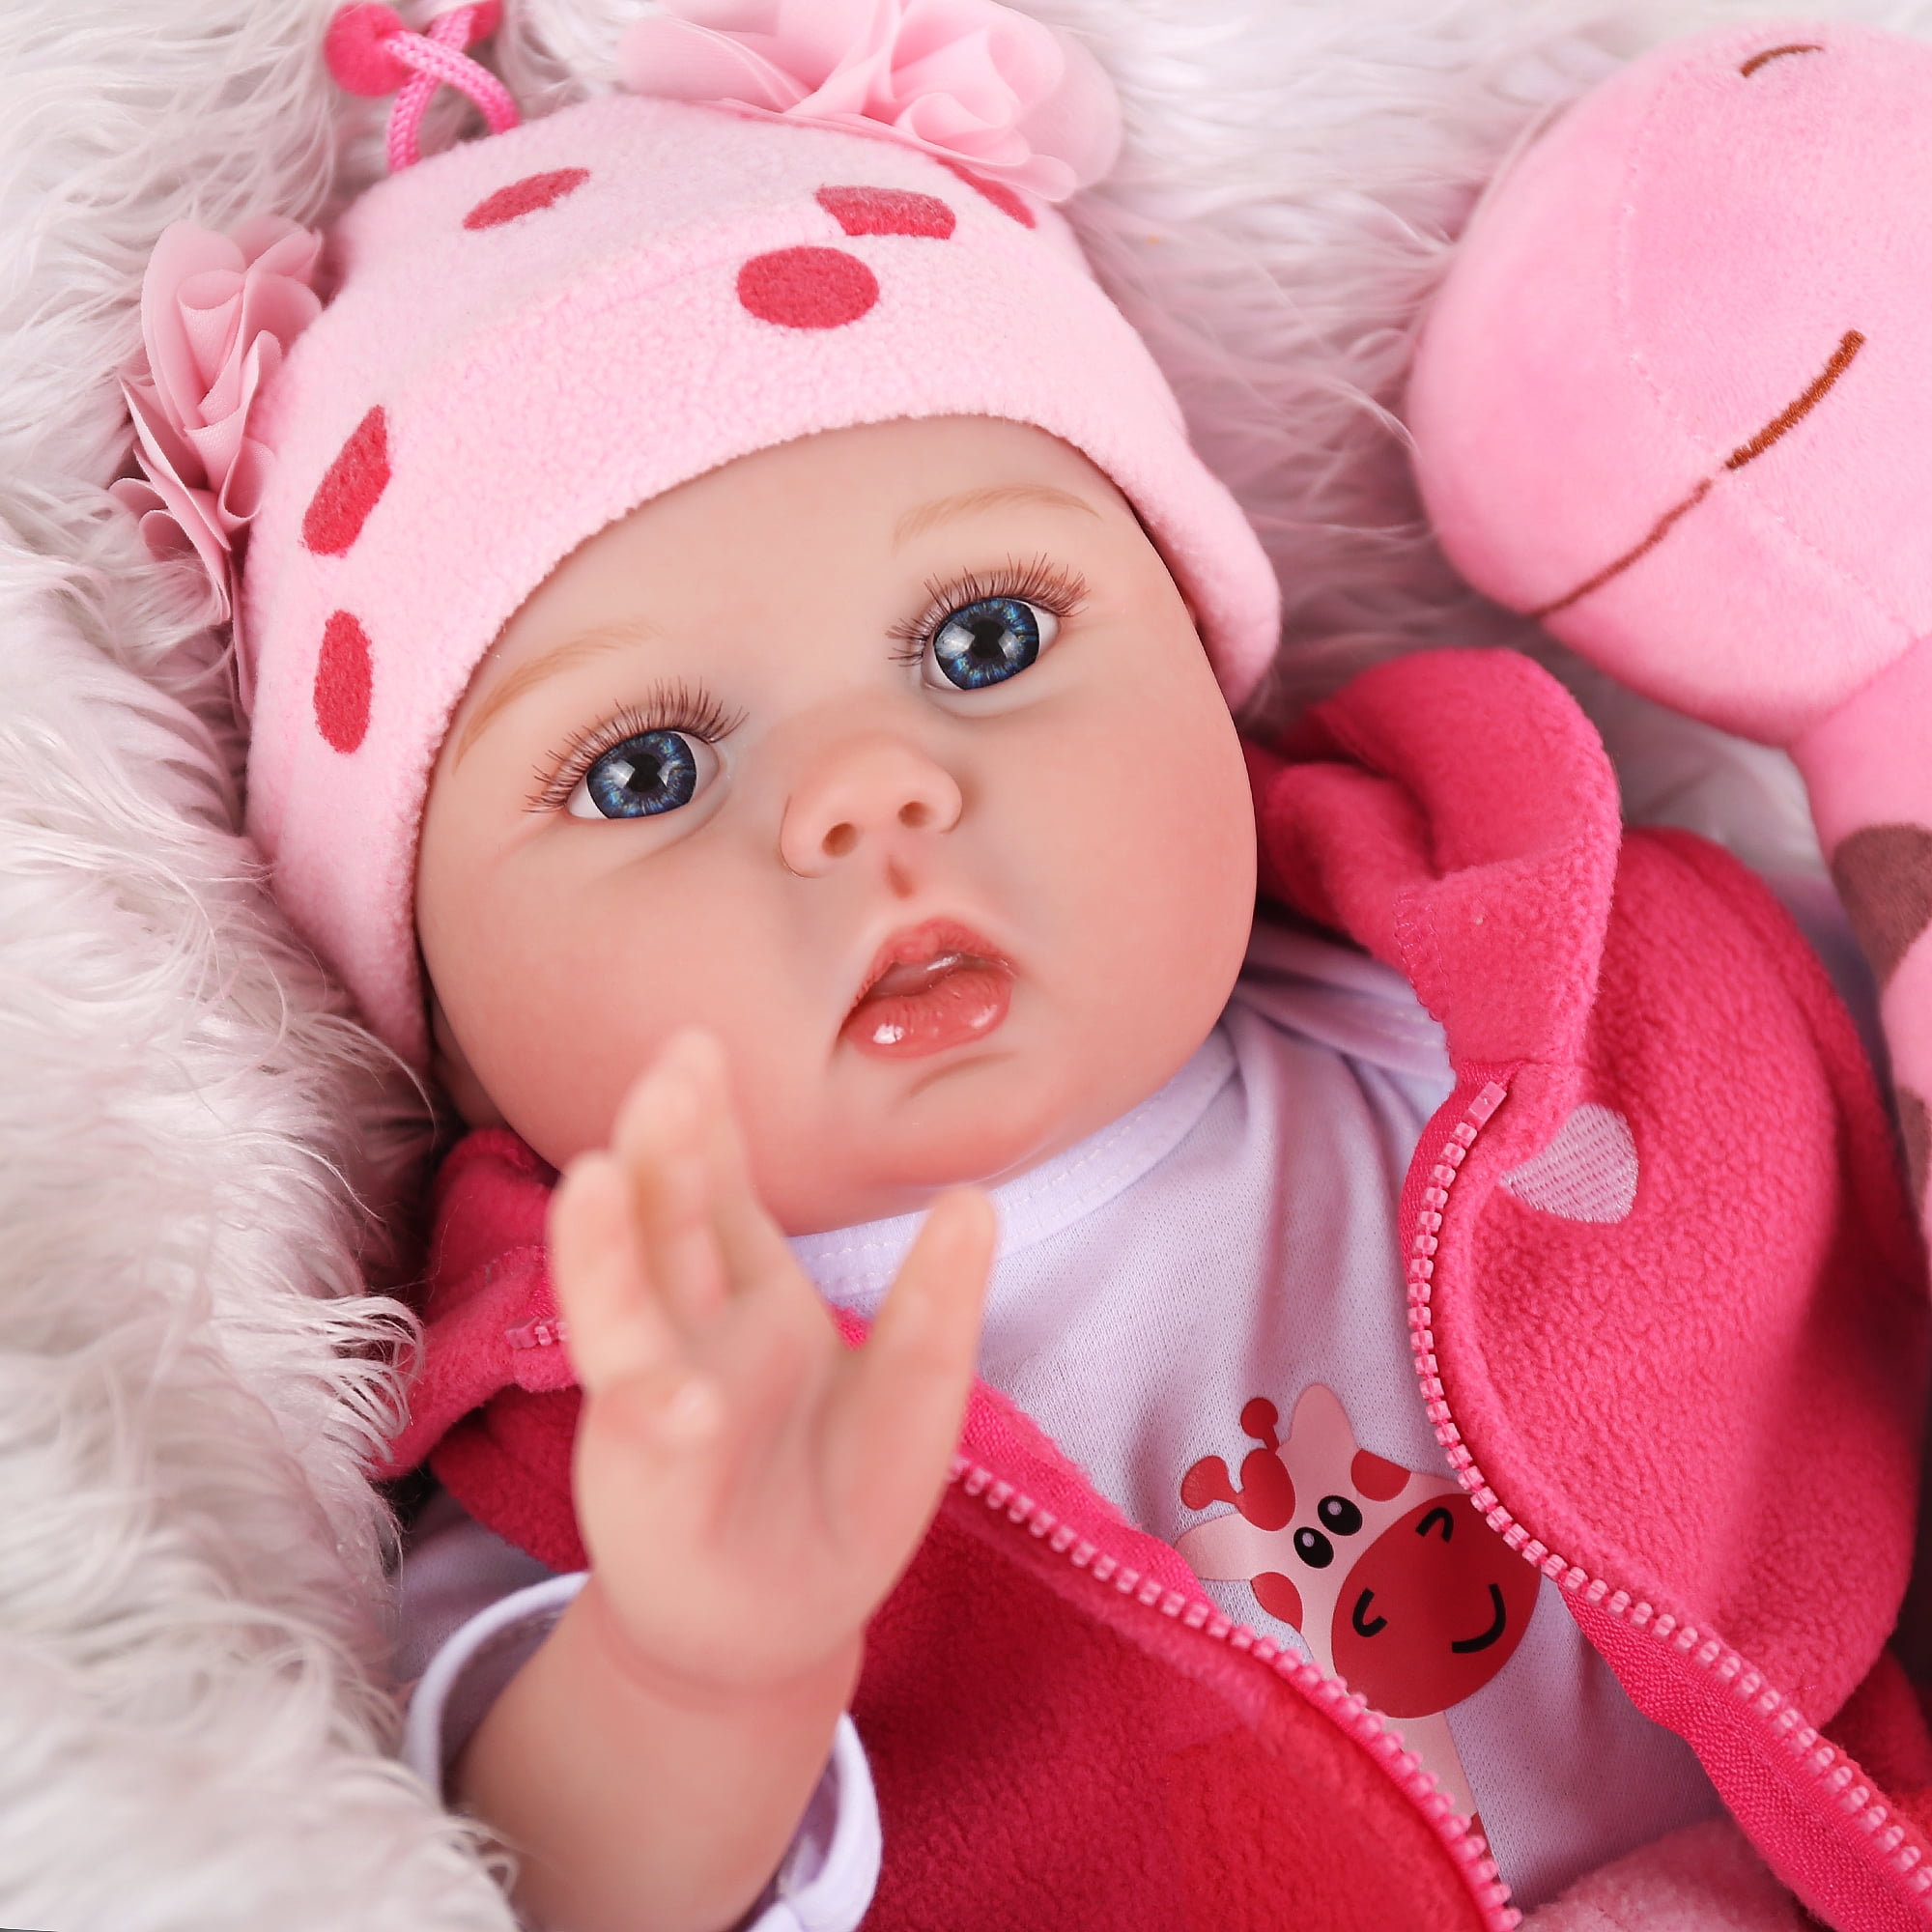  CHAREX Reborn Baby Dolls - 22 inches Realistic Newborn Soft  Vinyl Baby Dolls Toy for Kids Age 3+ : Toys & Games